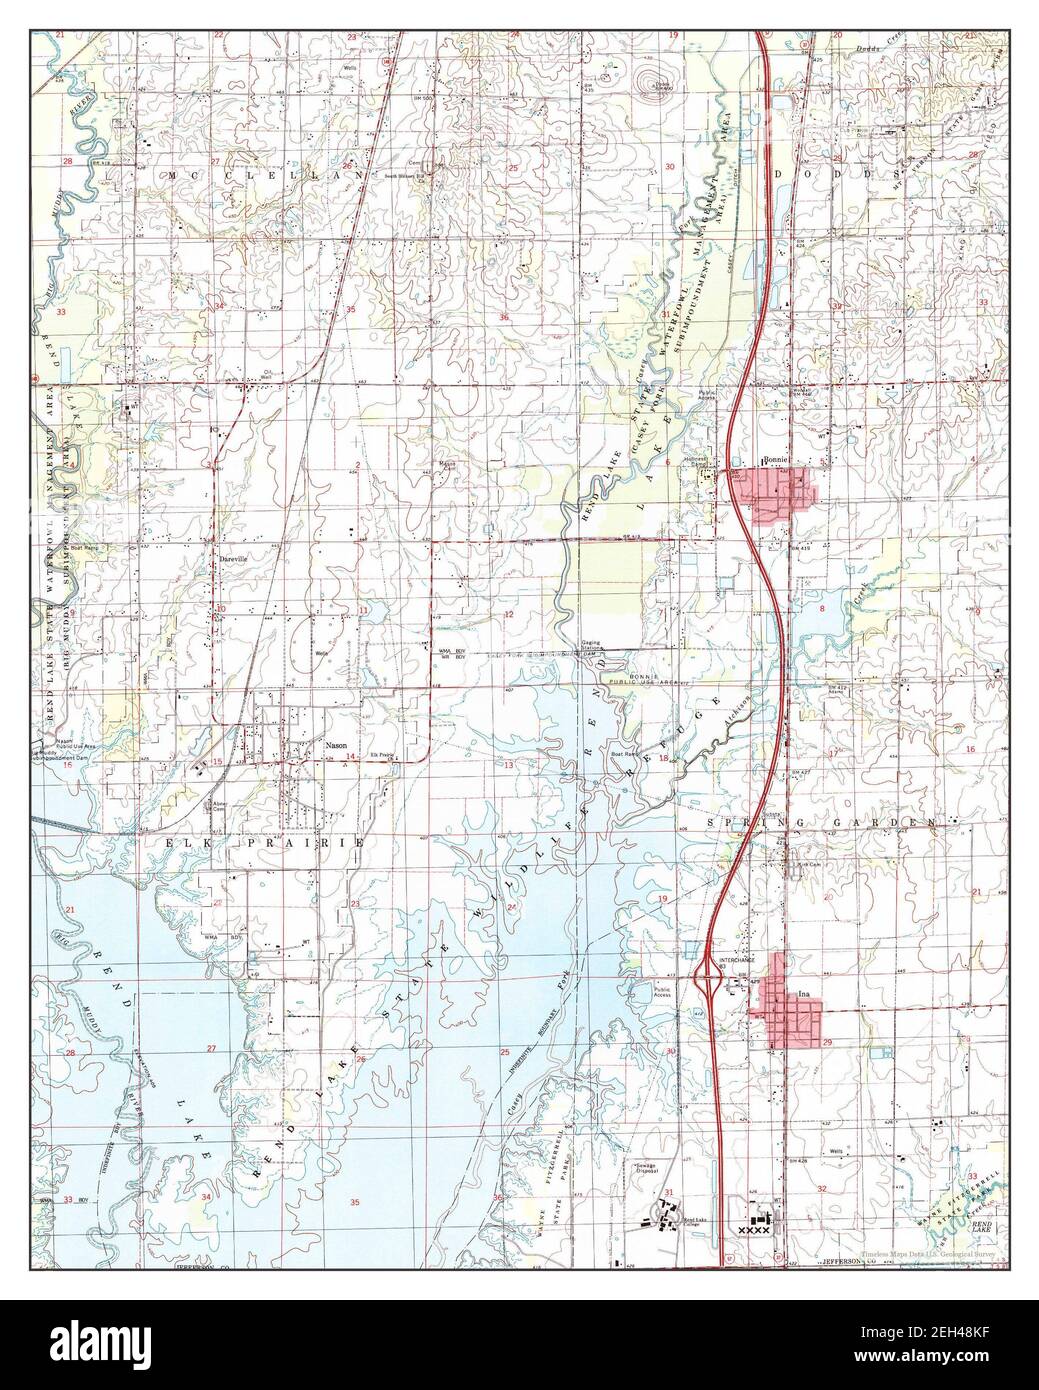 Ina, Illinois, map 1998, 1:24000, United States of America by Timeless Maps, data U.S. Geological Survey Stock Photo